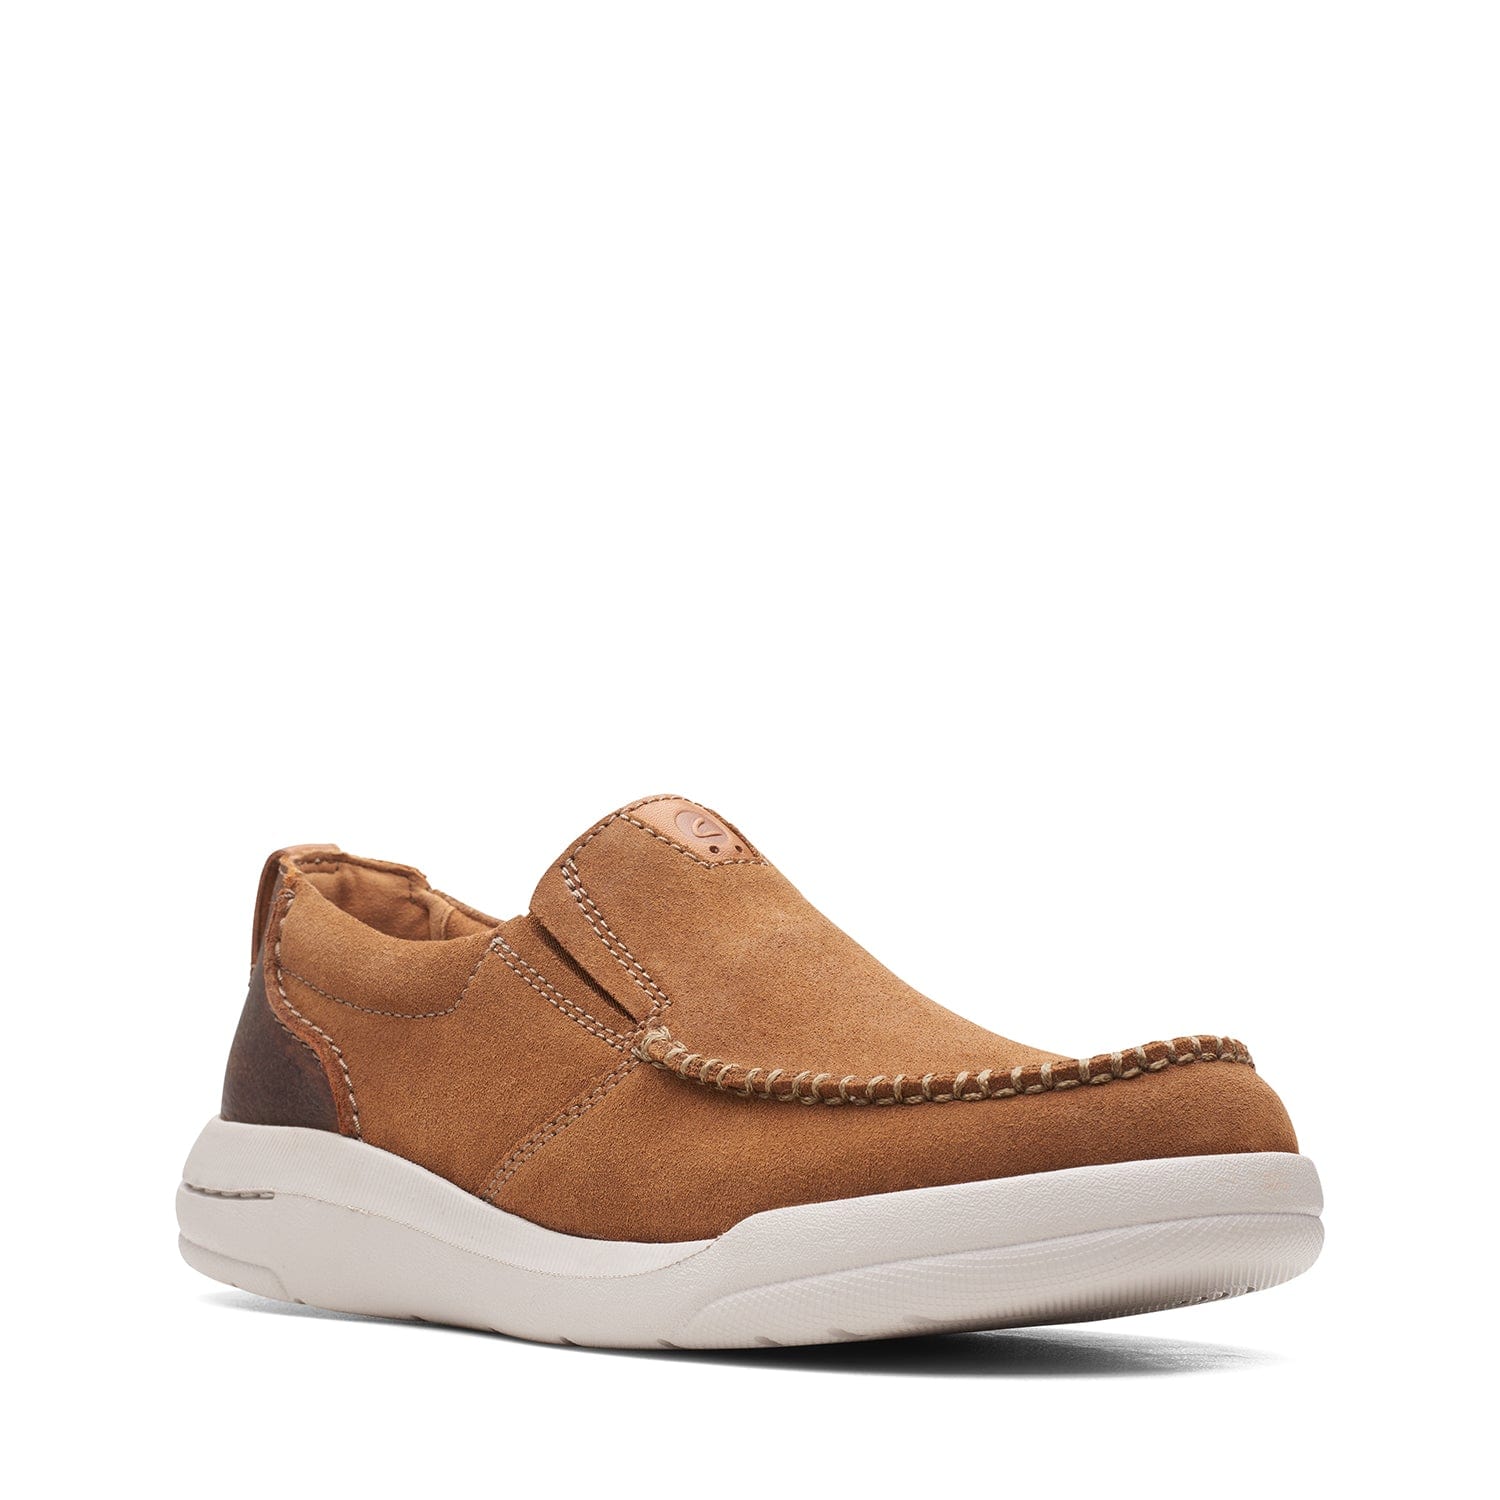 Clarks Driftway Step Shoes - Tan Suede - 261638567 - G Width (Standard Fit)